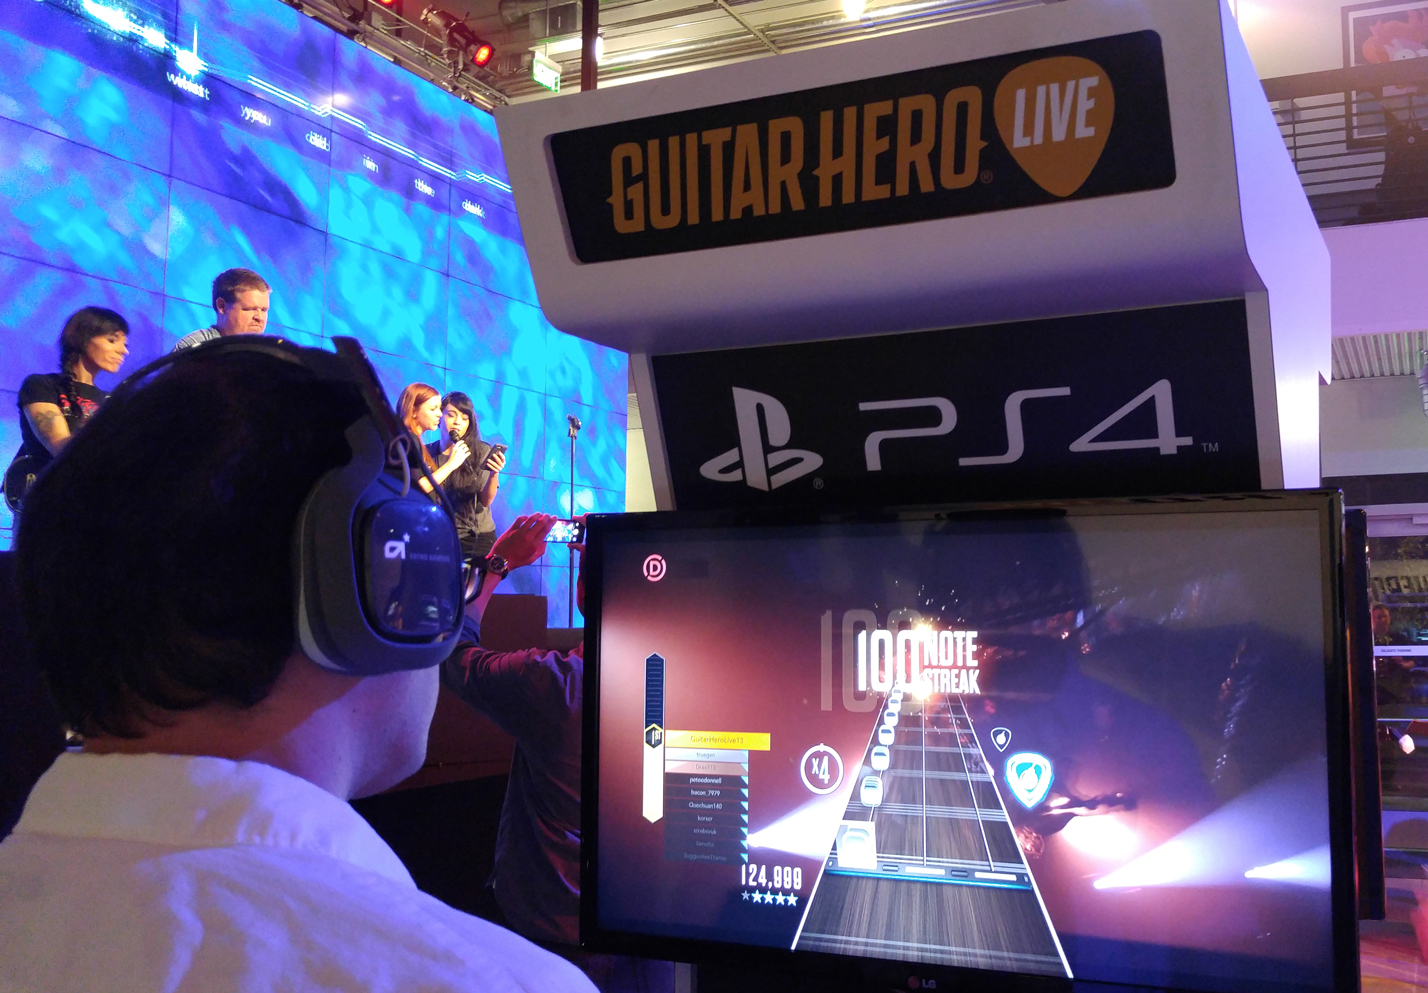 Guitar Hero Live PS4 station YouTube Space LA